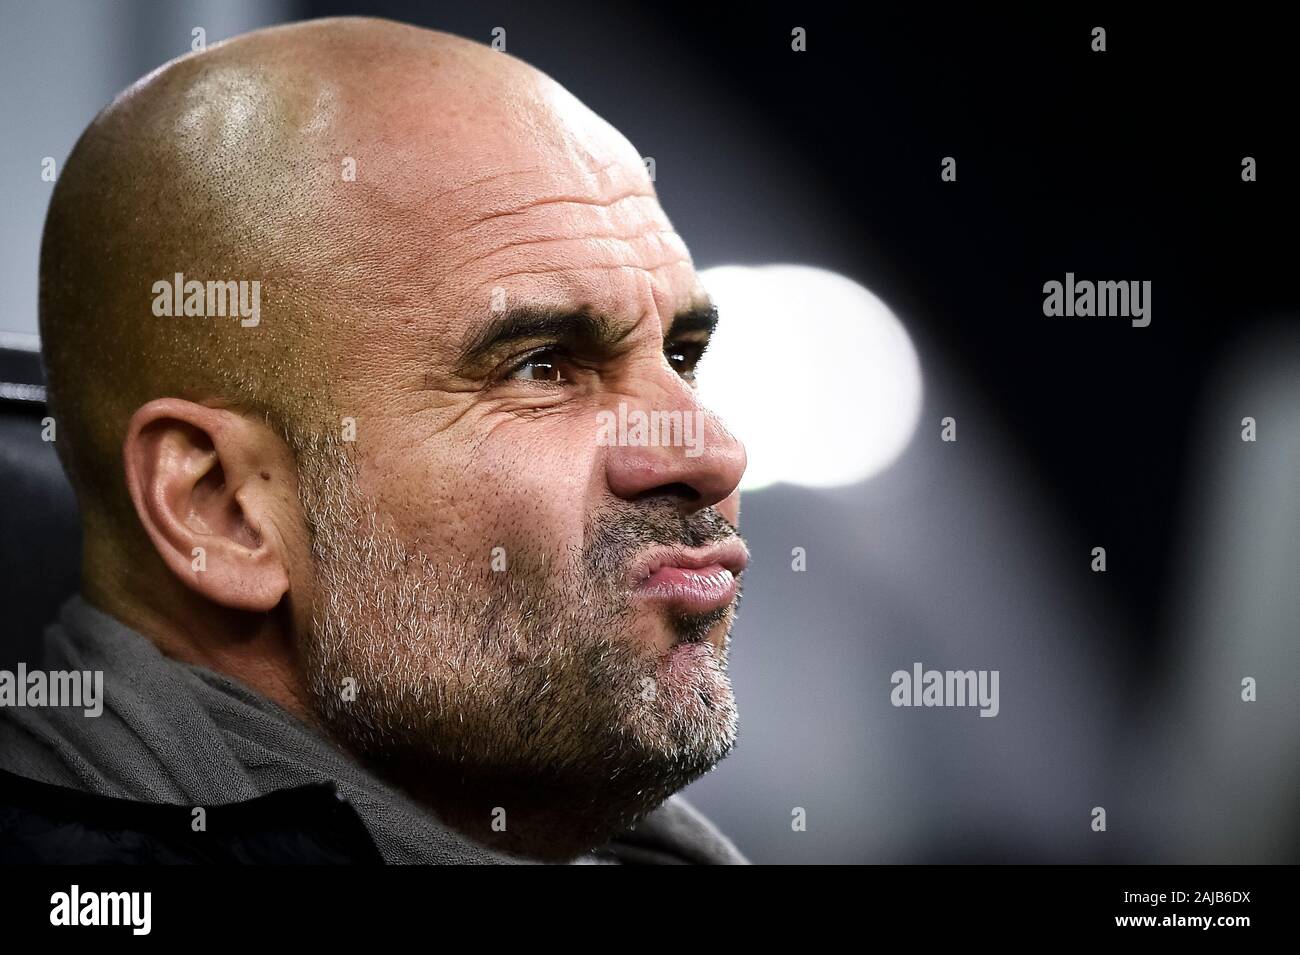 Milan, Italy - 06 November, 2019: Josep Guardiola, head coach of Manchester City FC, reacts prior to the UEFA Champions League football match between Atalanta BC and Manchester City FC. The match ended in a 1-1 tie. Credit: Nicolò Campo/Alamy Live News Stock Photo